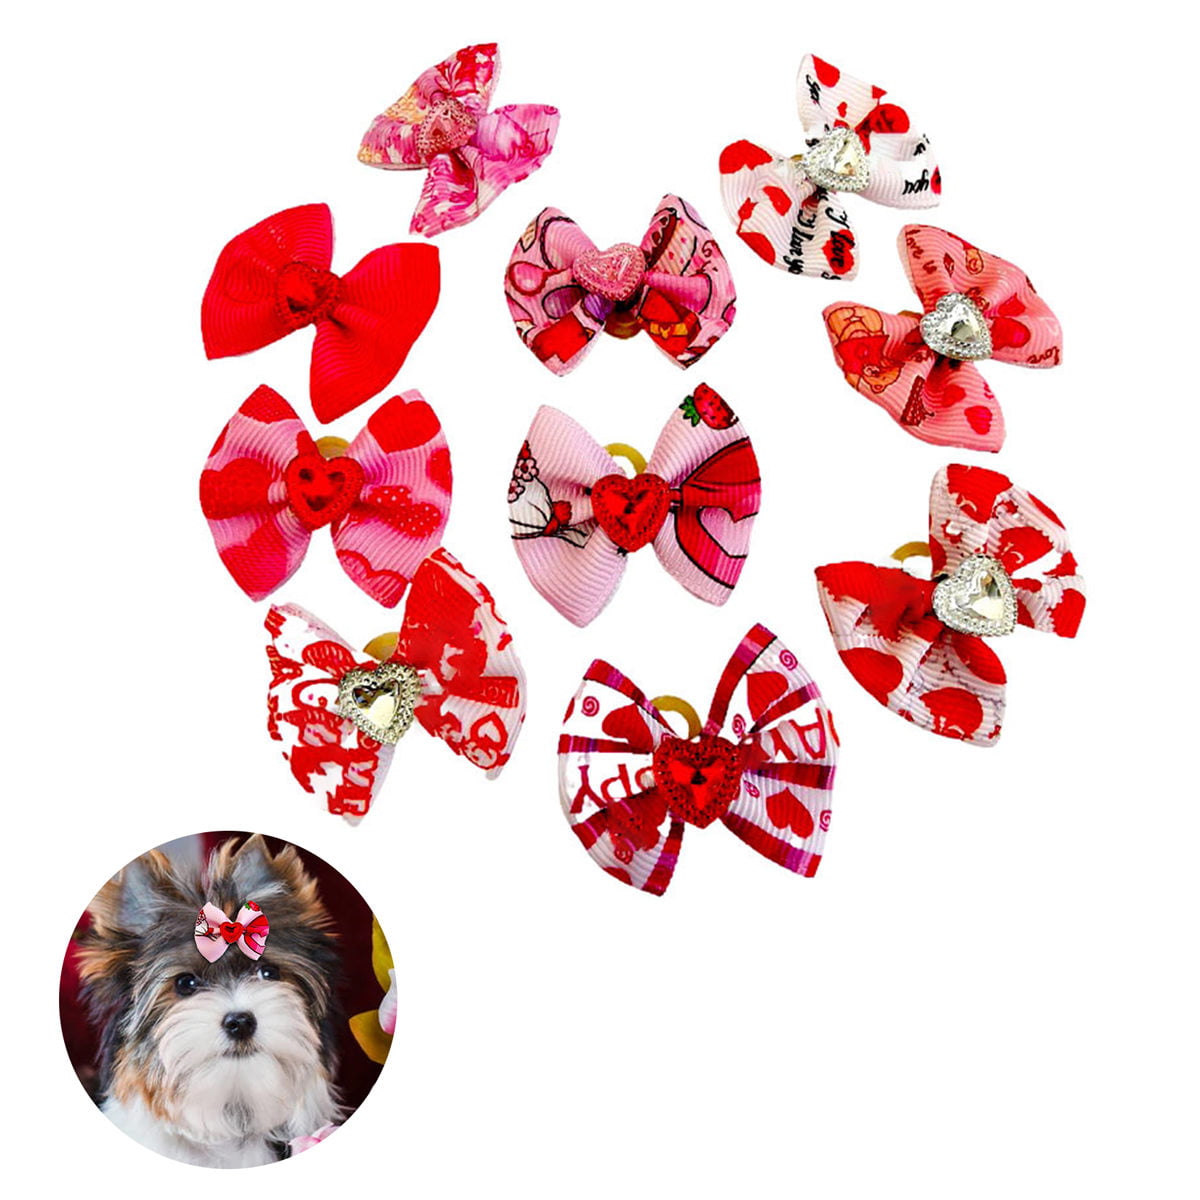 Red hair clip for dogs Girl dog bow with hearts Hearts Dog Hair Bows Red Dog Bows Valentines Dog hair bow clip